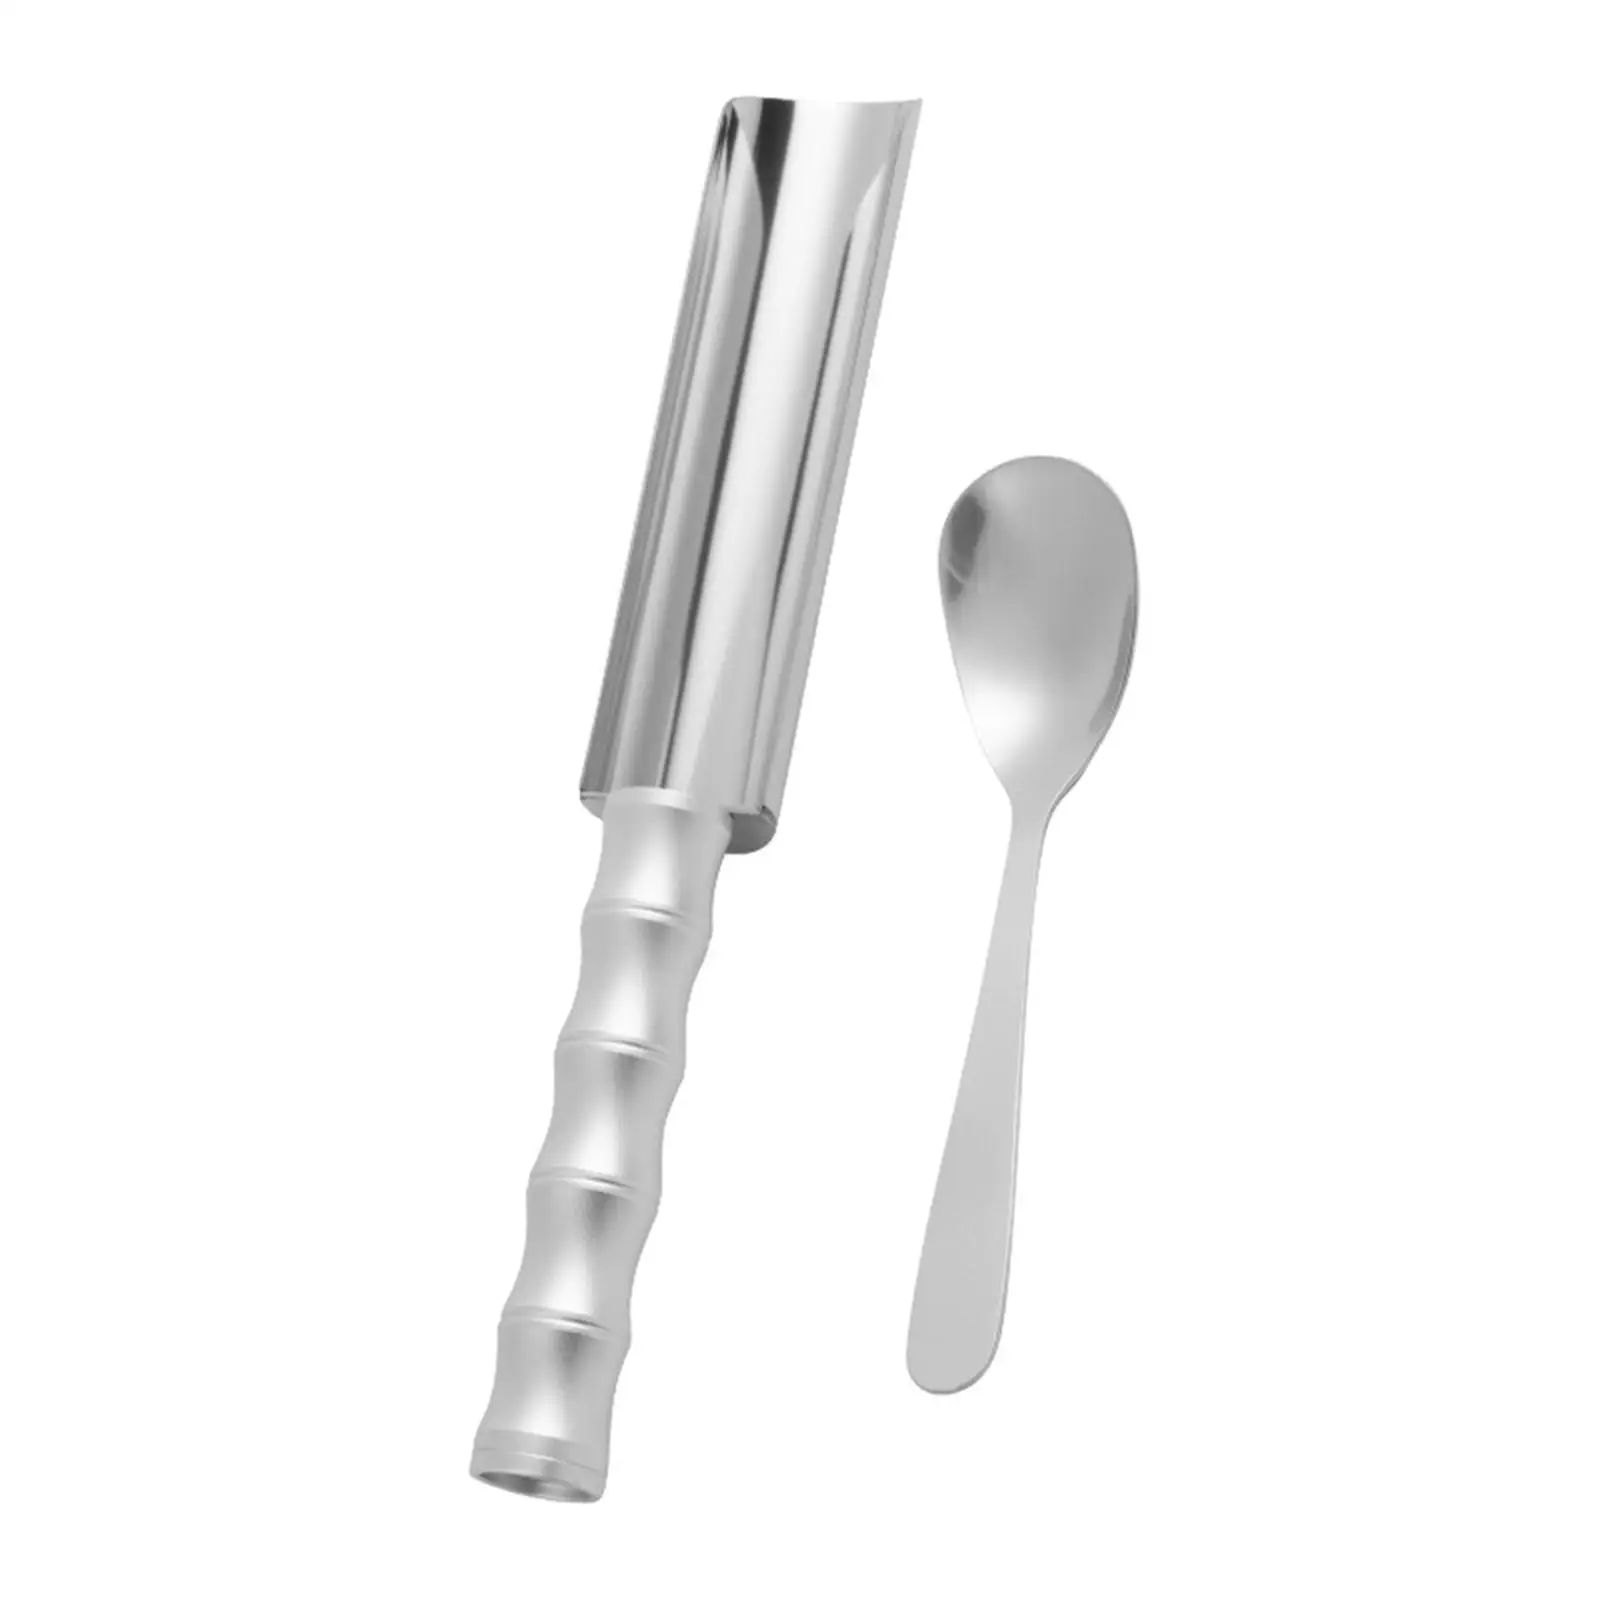 Kitchen Meatball Maker Portable Meat Baller Spoon with Spade DIY Meatball Making for Cooking Fish Ball Rice Balls Kitchen Cookie